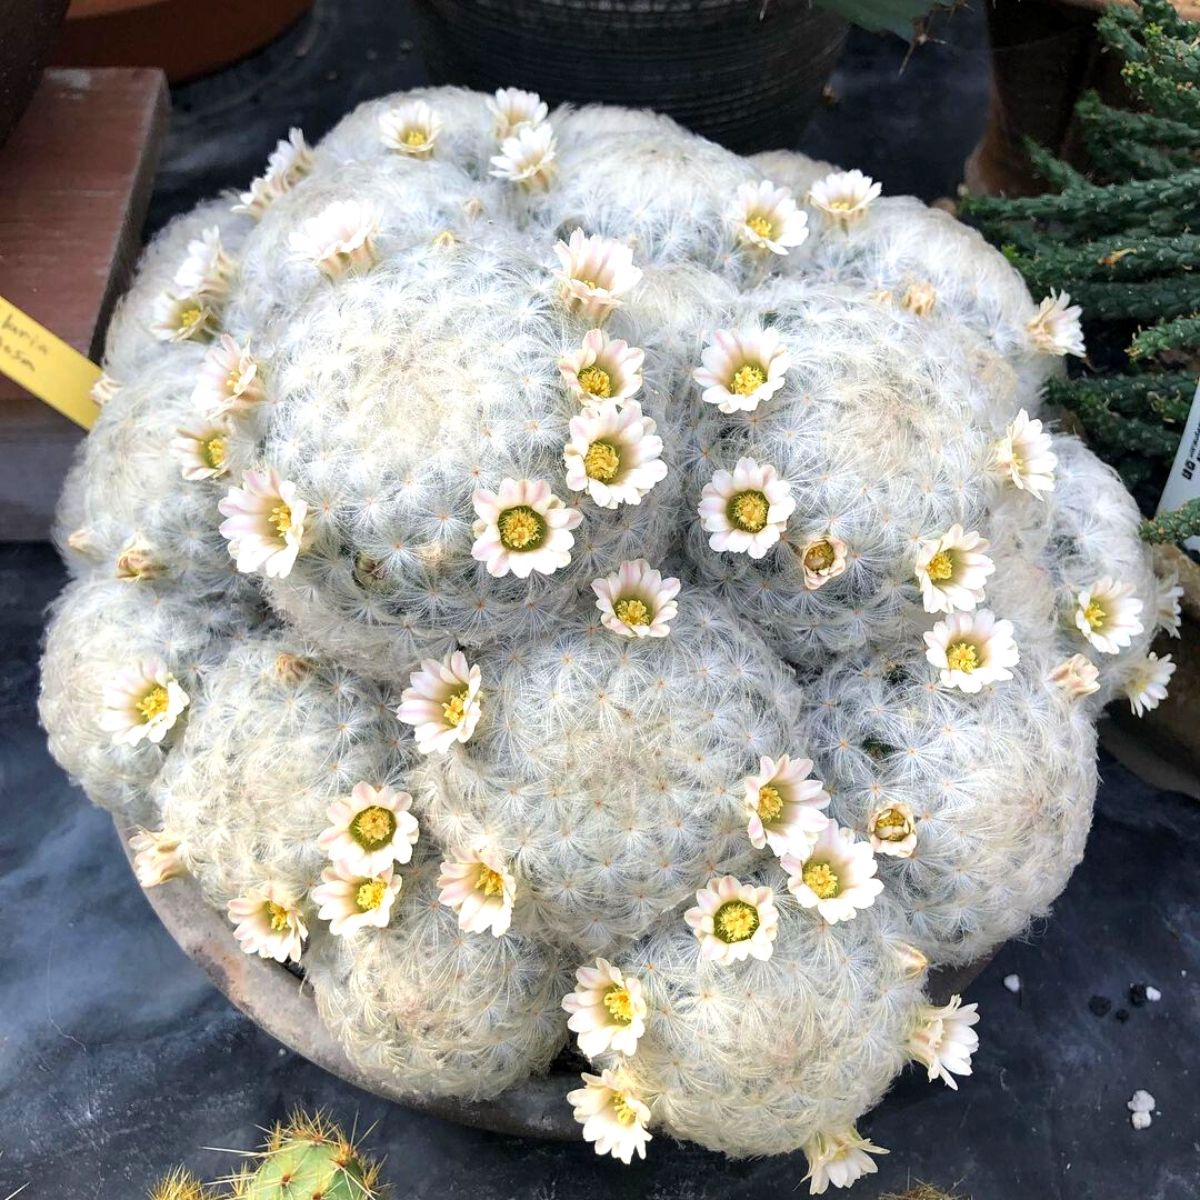 A feather cactus in full bloom